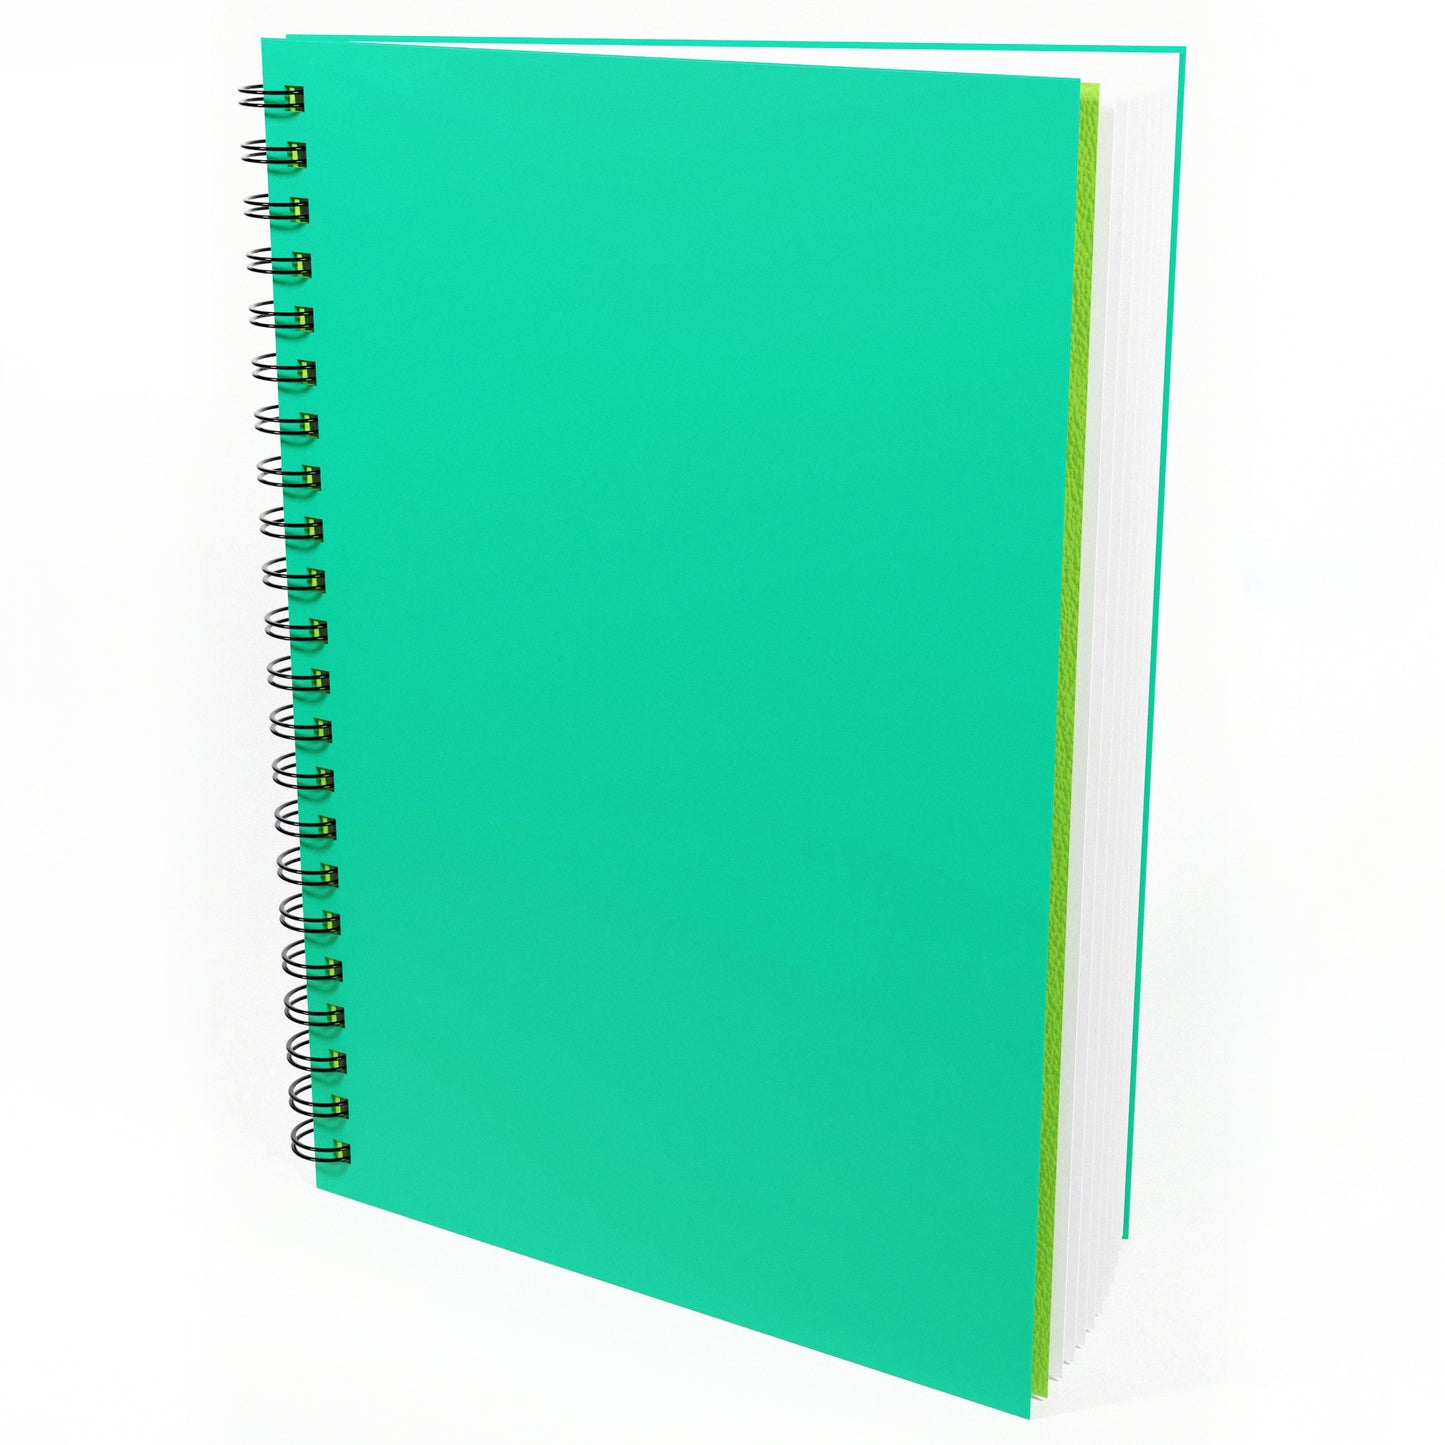 Large sketchbook, bright green with kraft toned pages